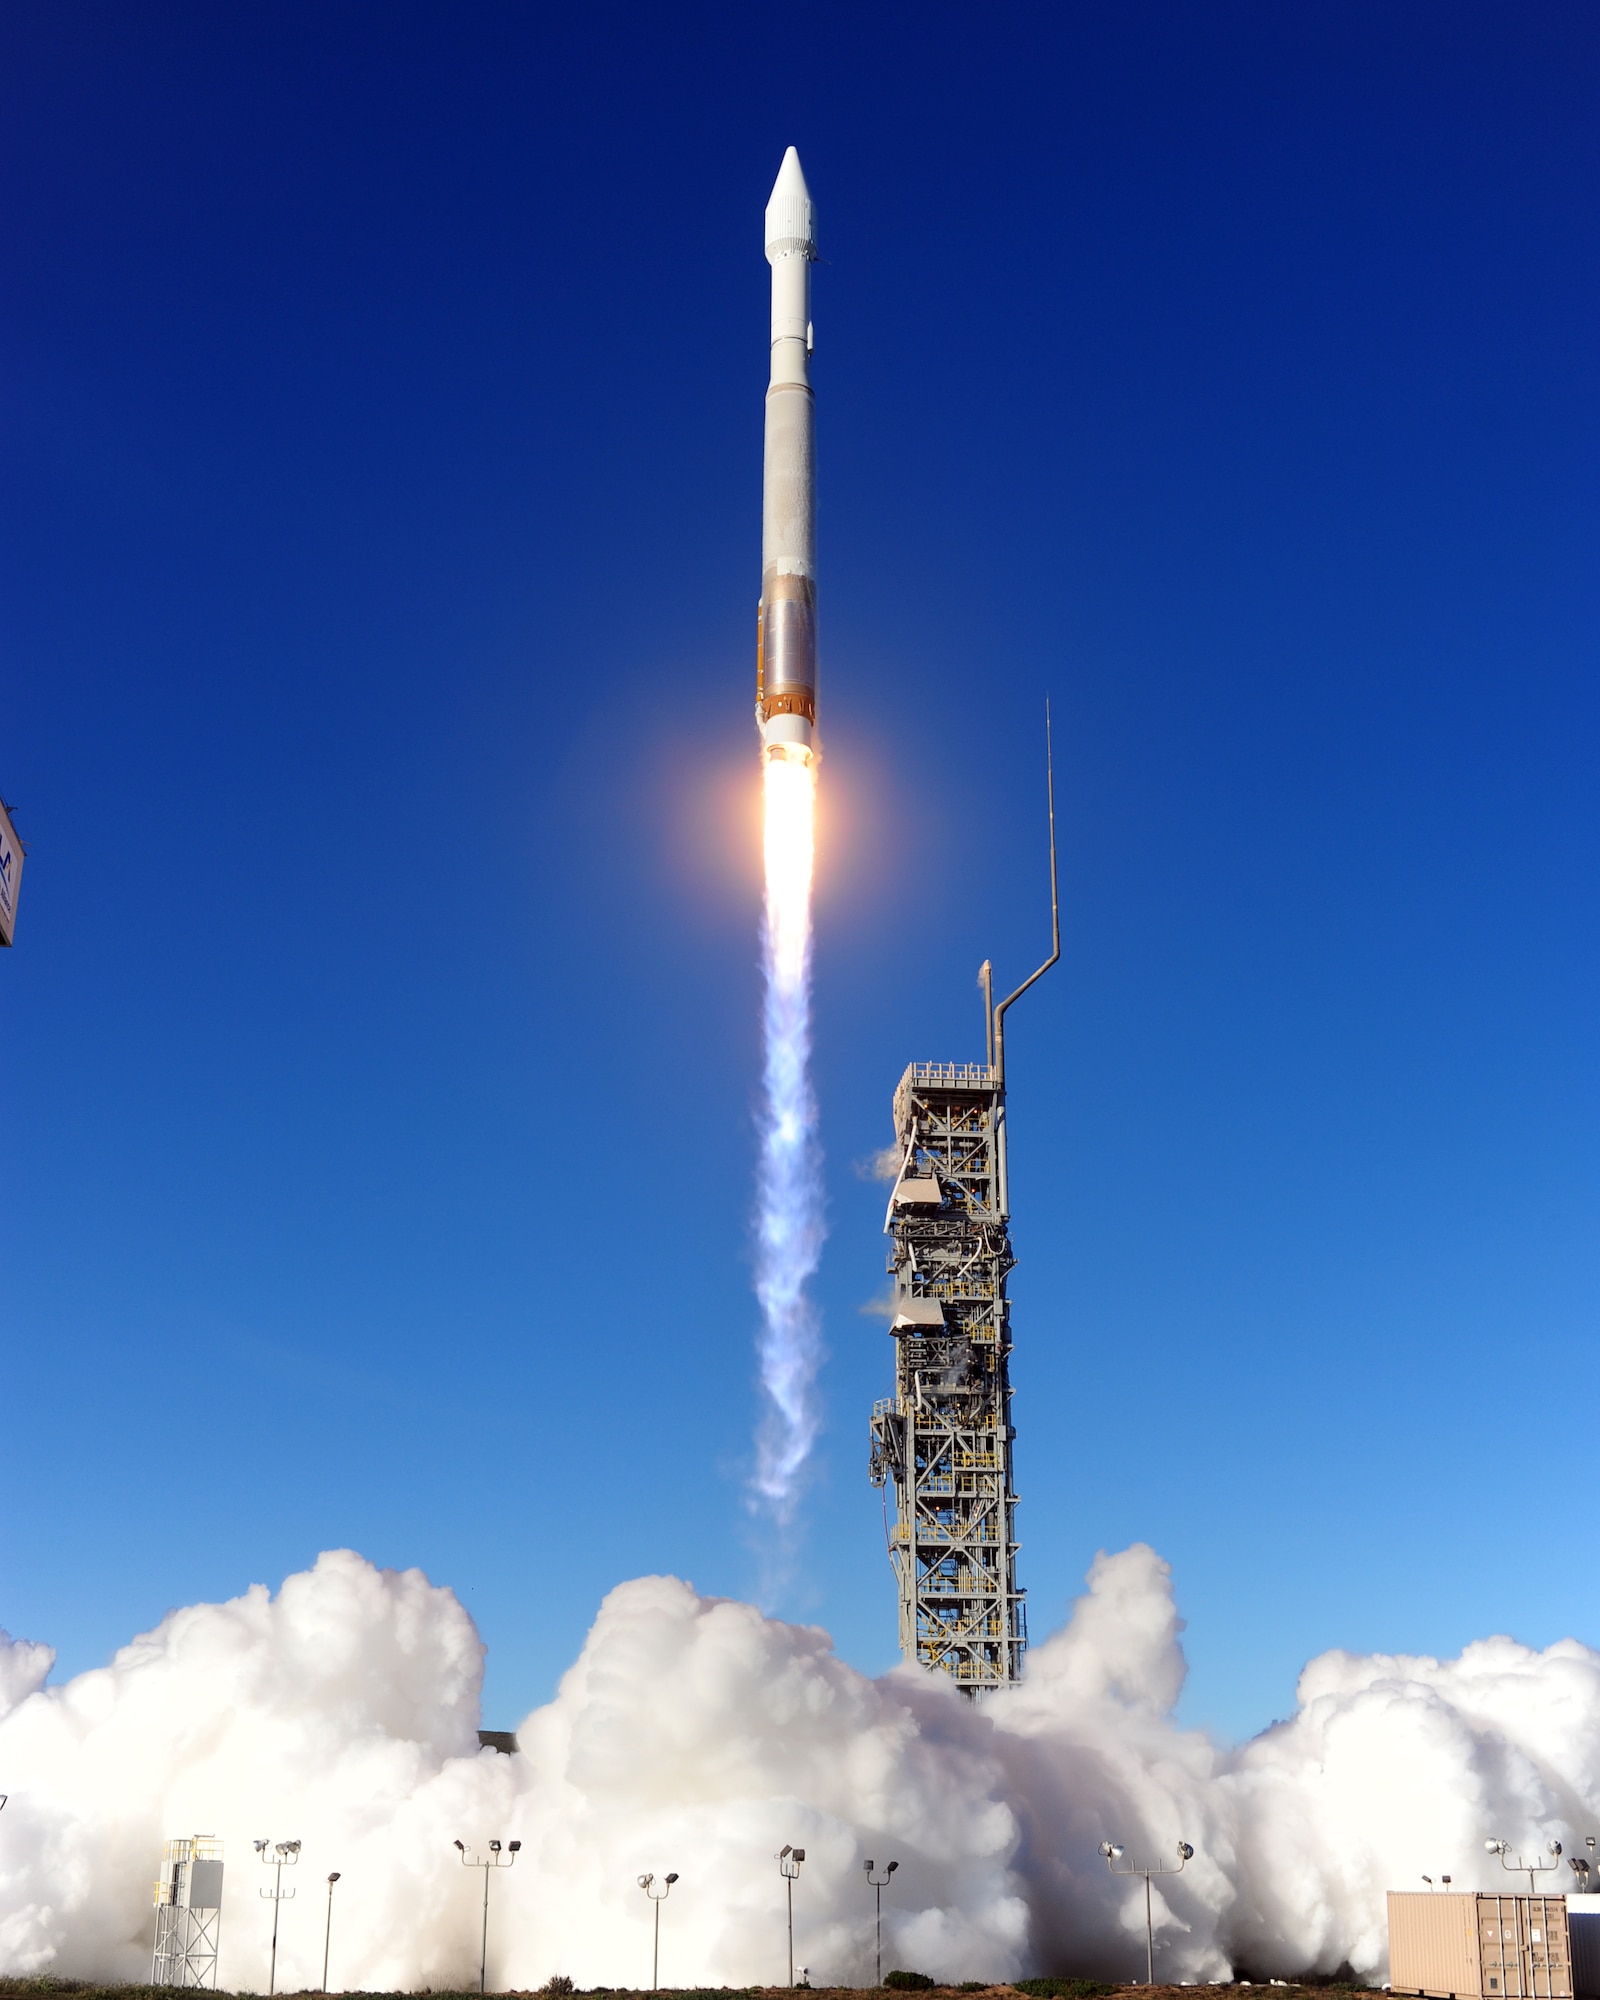 The 19th U.S. Air Force Defense Meteorological Satellite Program successfully launched a payload on an Atlas V rocket from Space Launch Complex-3 at 7:46 a.m. PDT, April 3, 2014 at Vandenberg Air Force Base, Calif. (U.S. Air Force photo/Joe Davila)